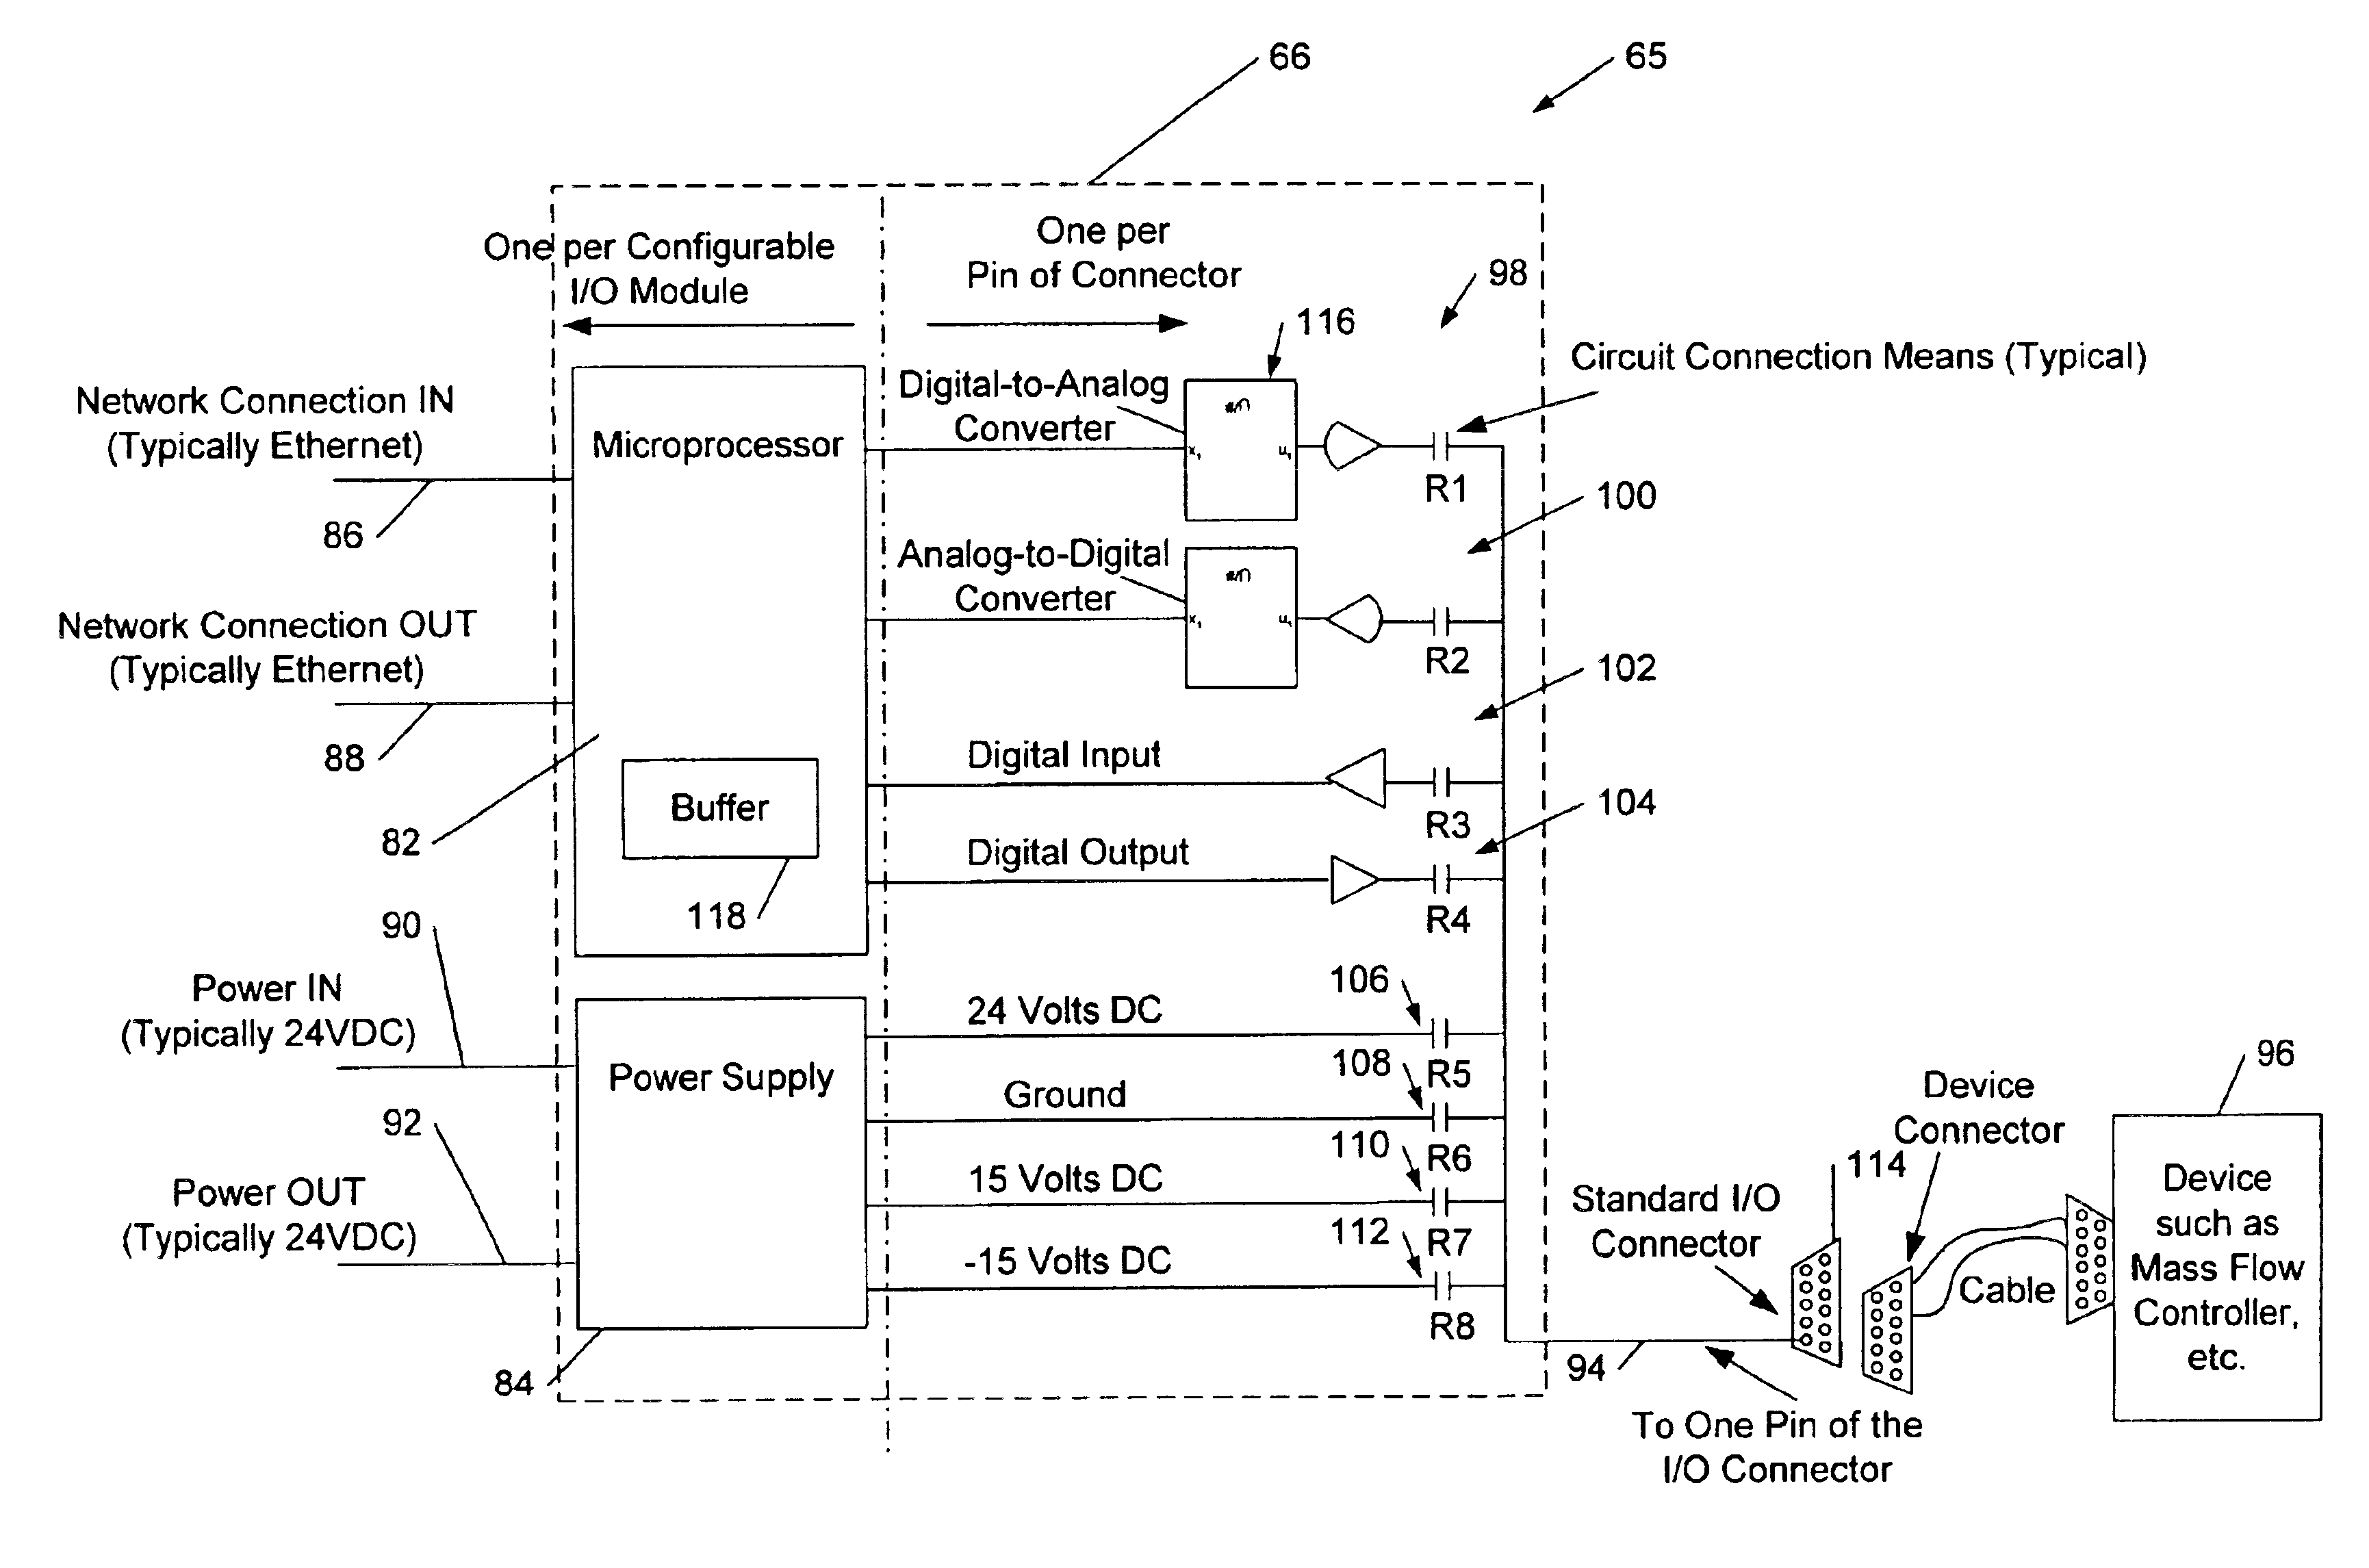 Configurable connectorized I/O system